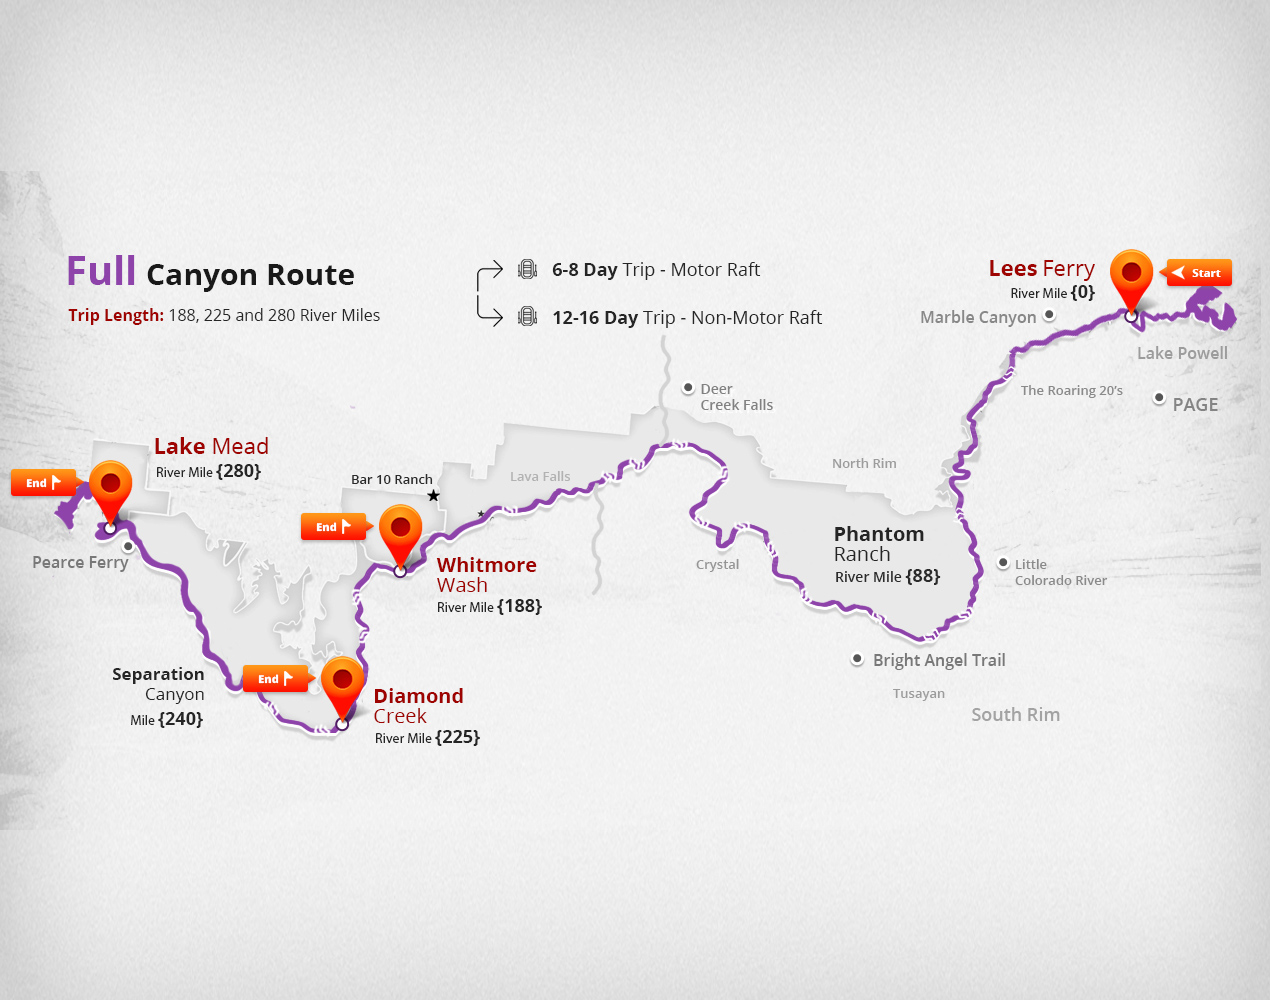 FULL GRAND CANYON ROUTE MAP